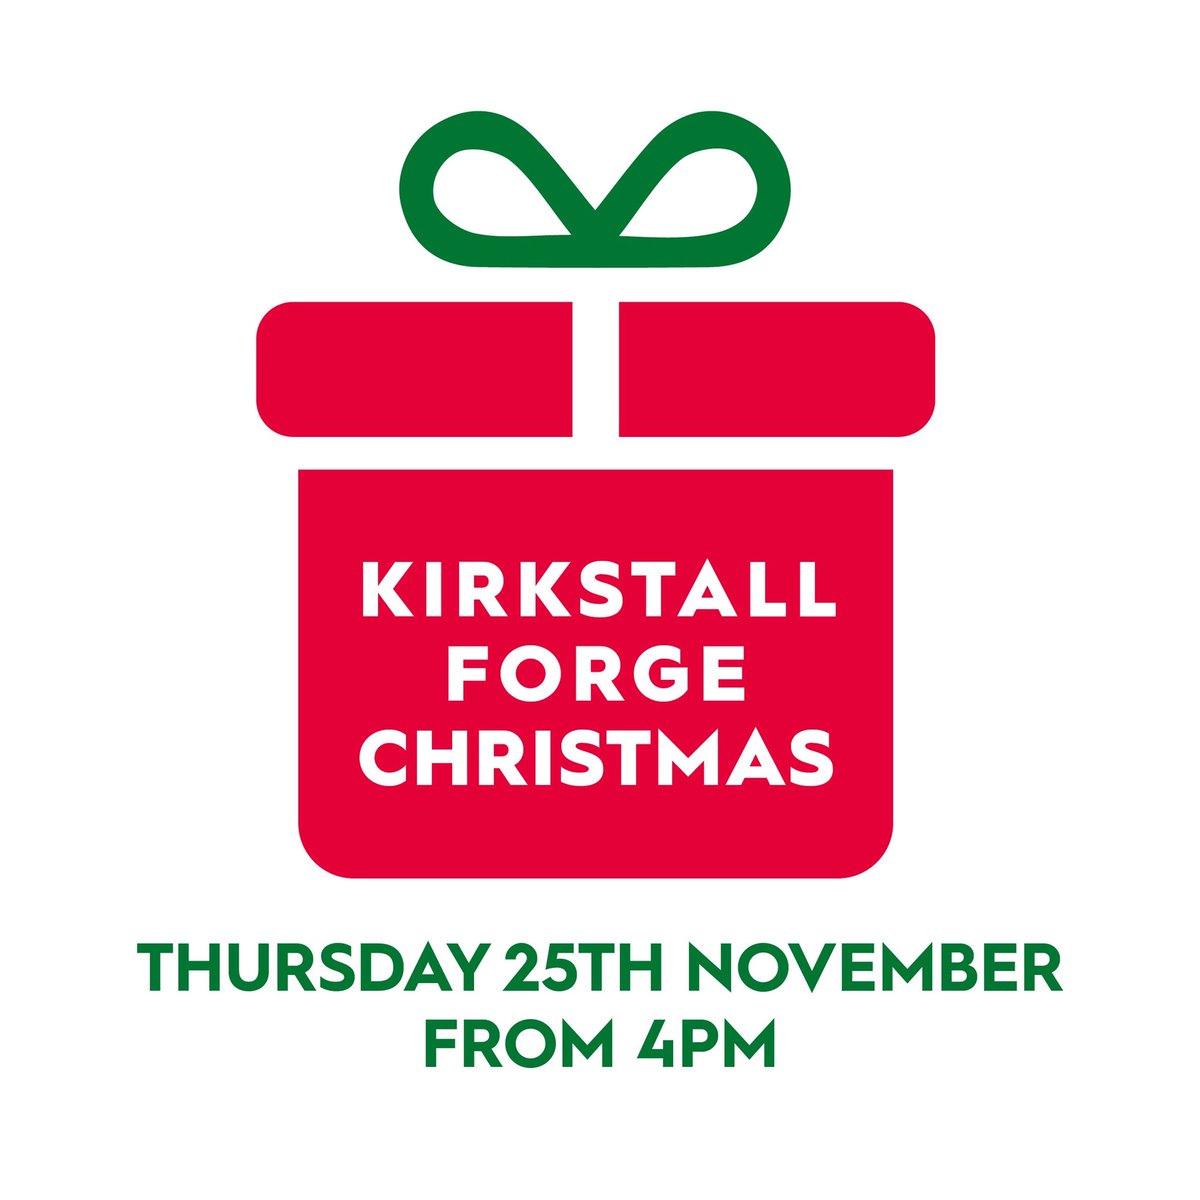 We can’t wait to see you for our #kirkstallforgechristmas event tomorrow!